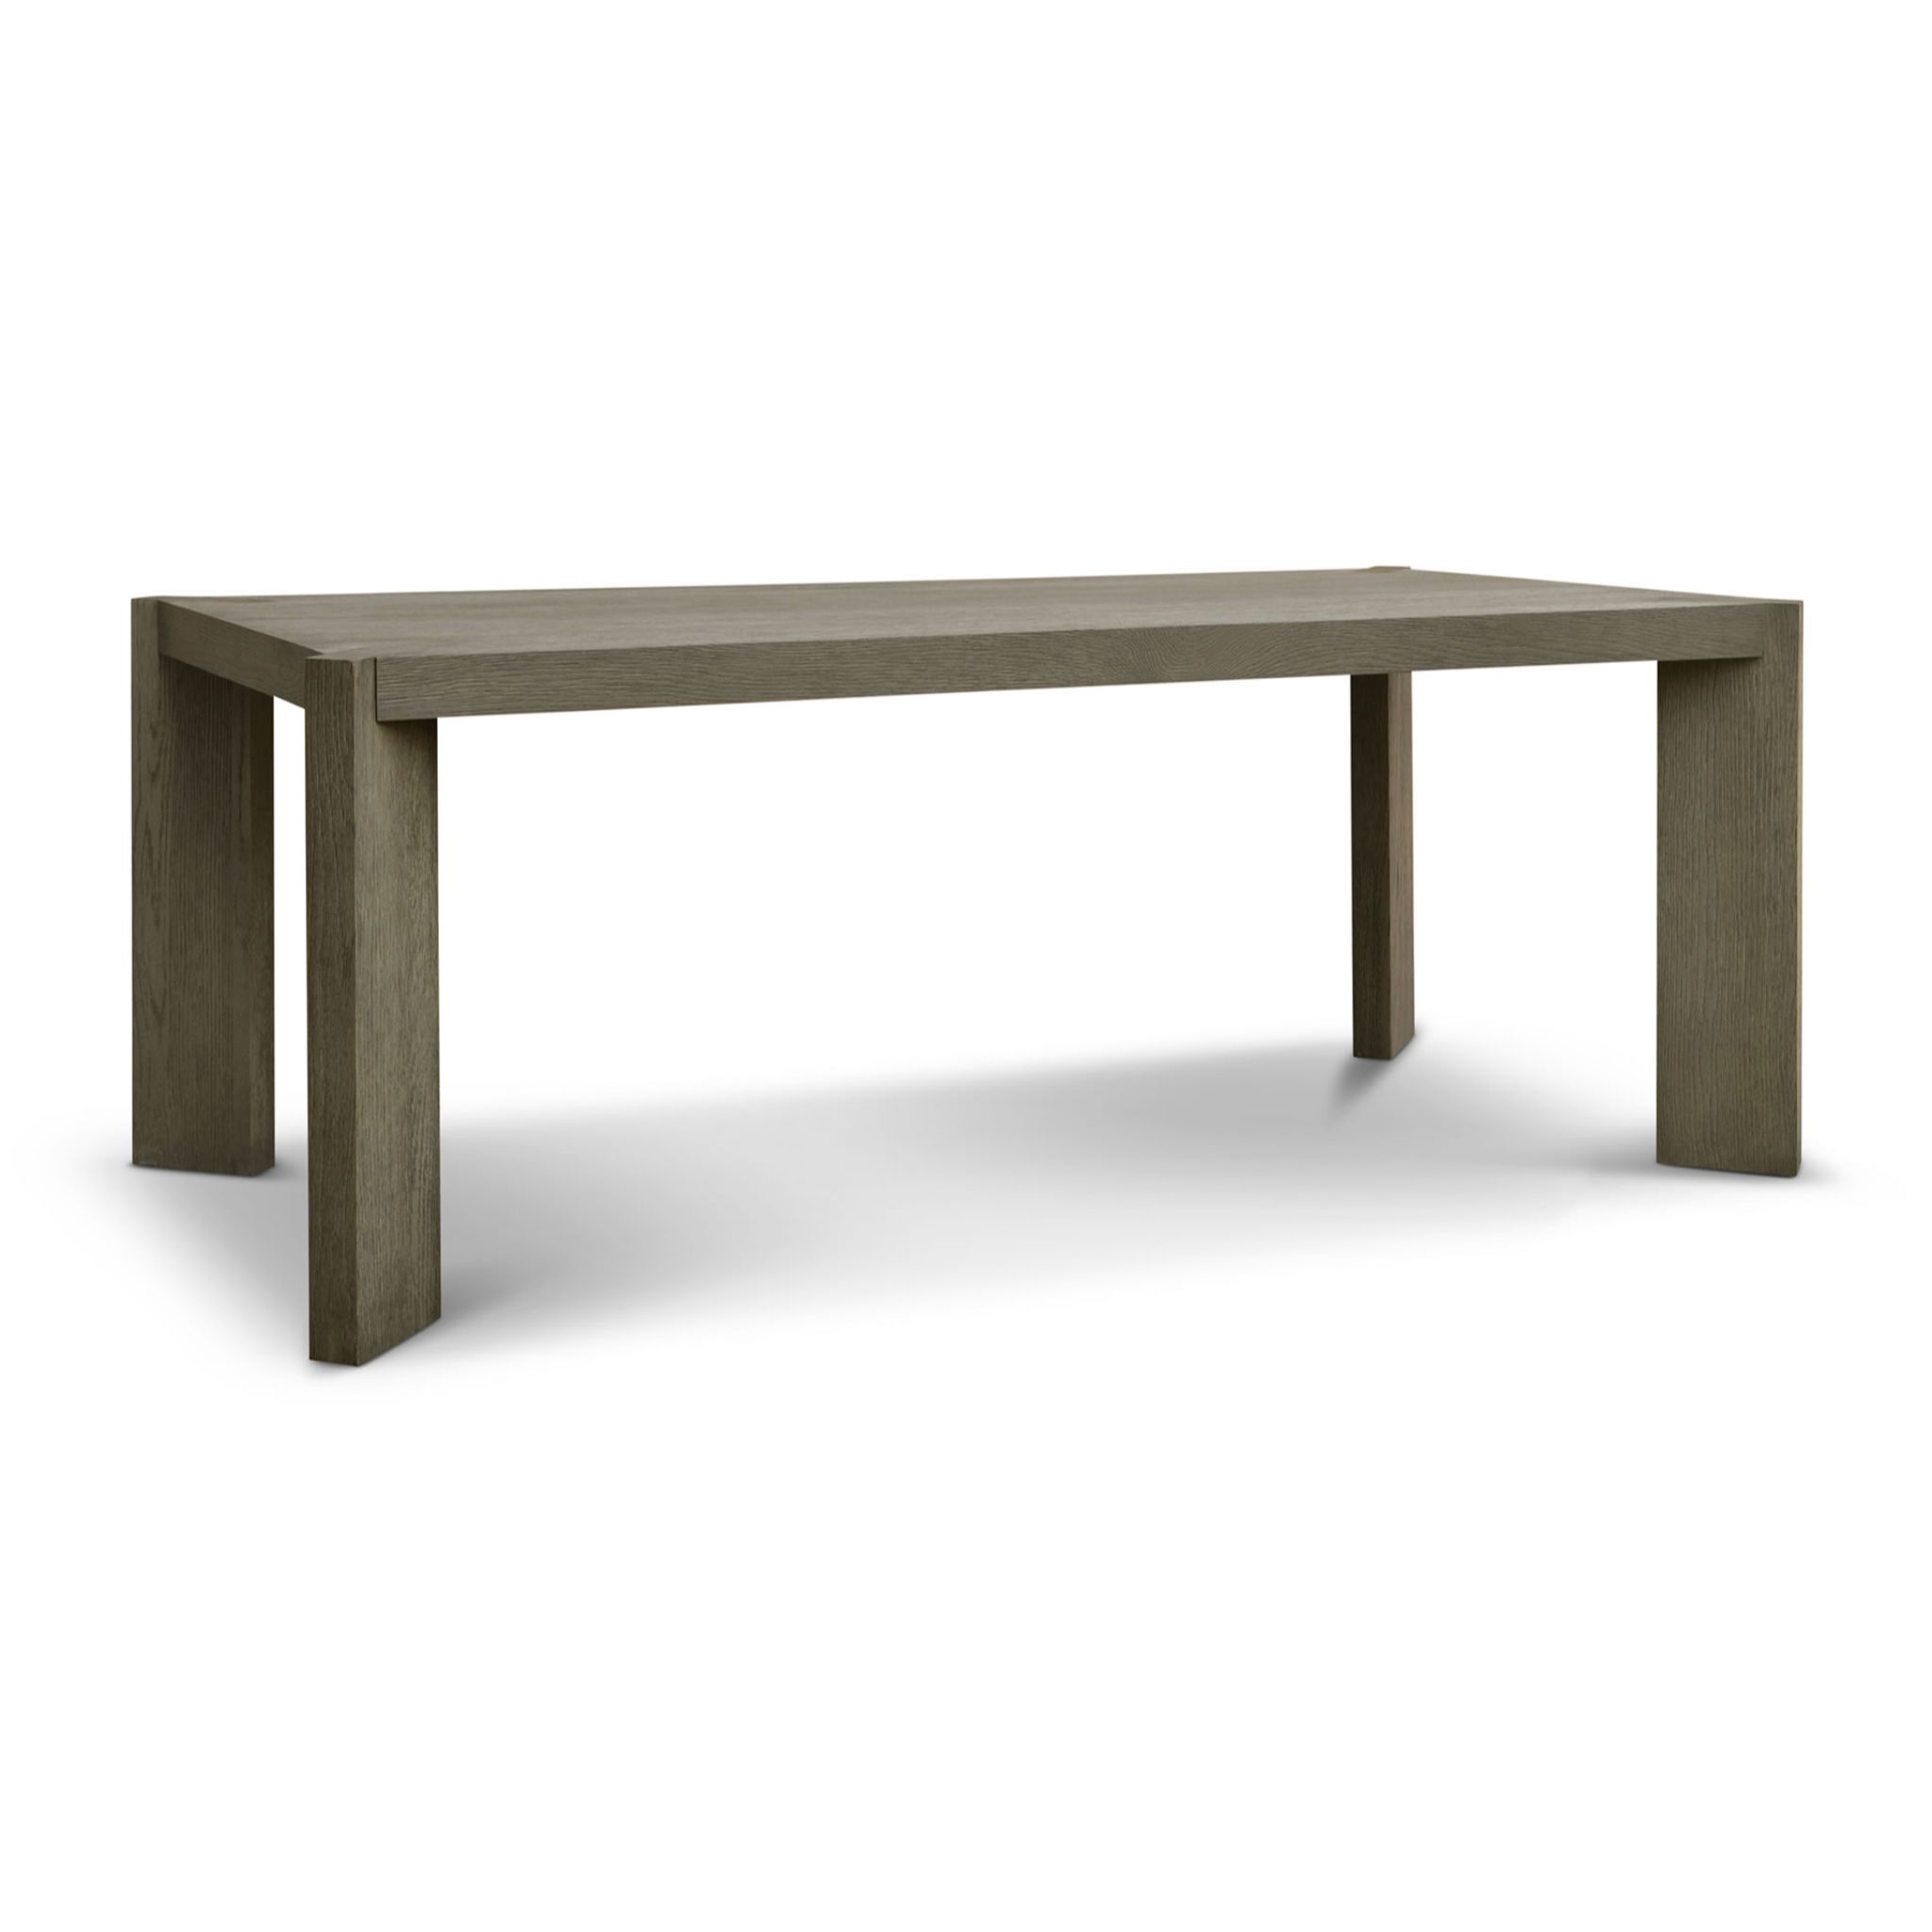 Berkeley Designs Lucca Dining Table 200 x 100 x 76cm – Furniture & Homeware – The Luxe Home